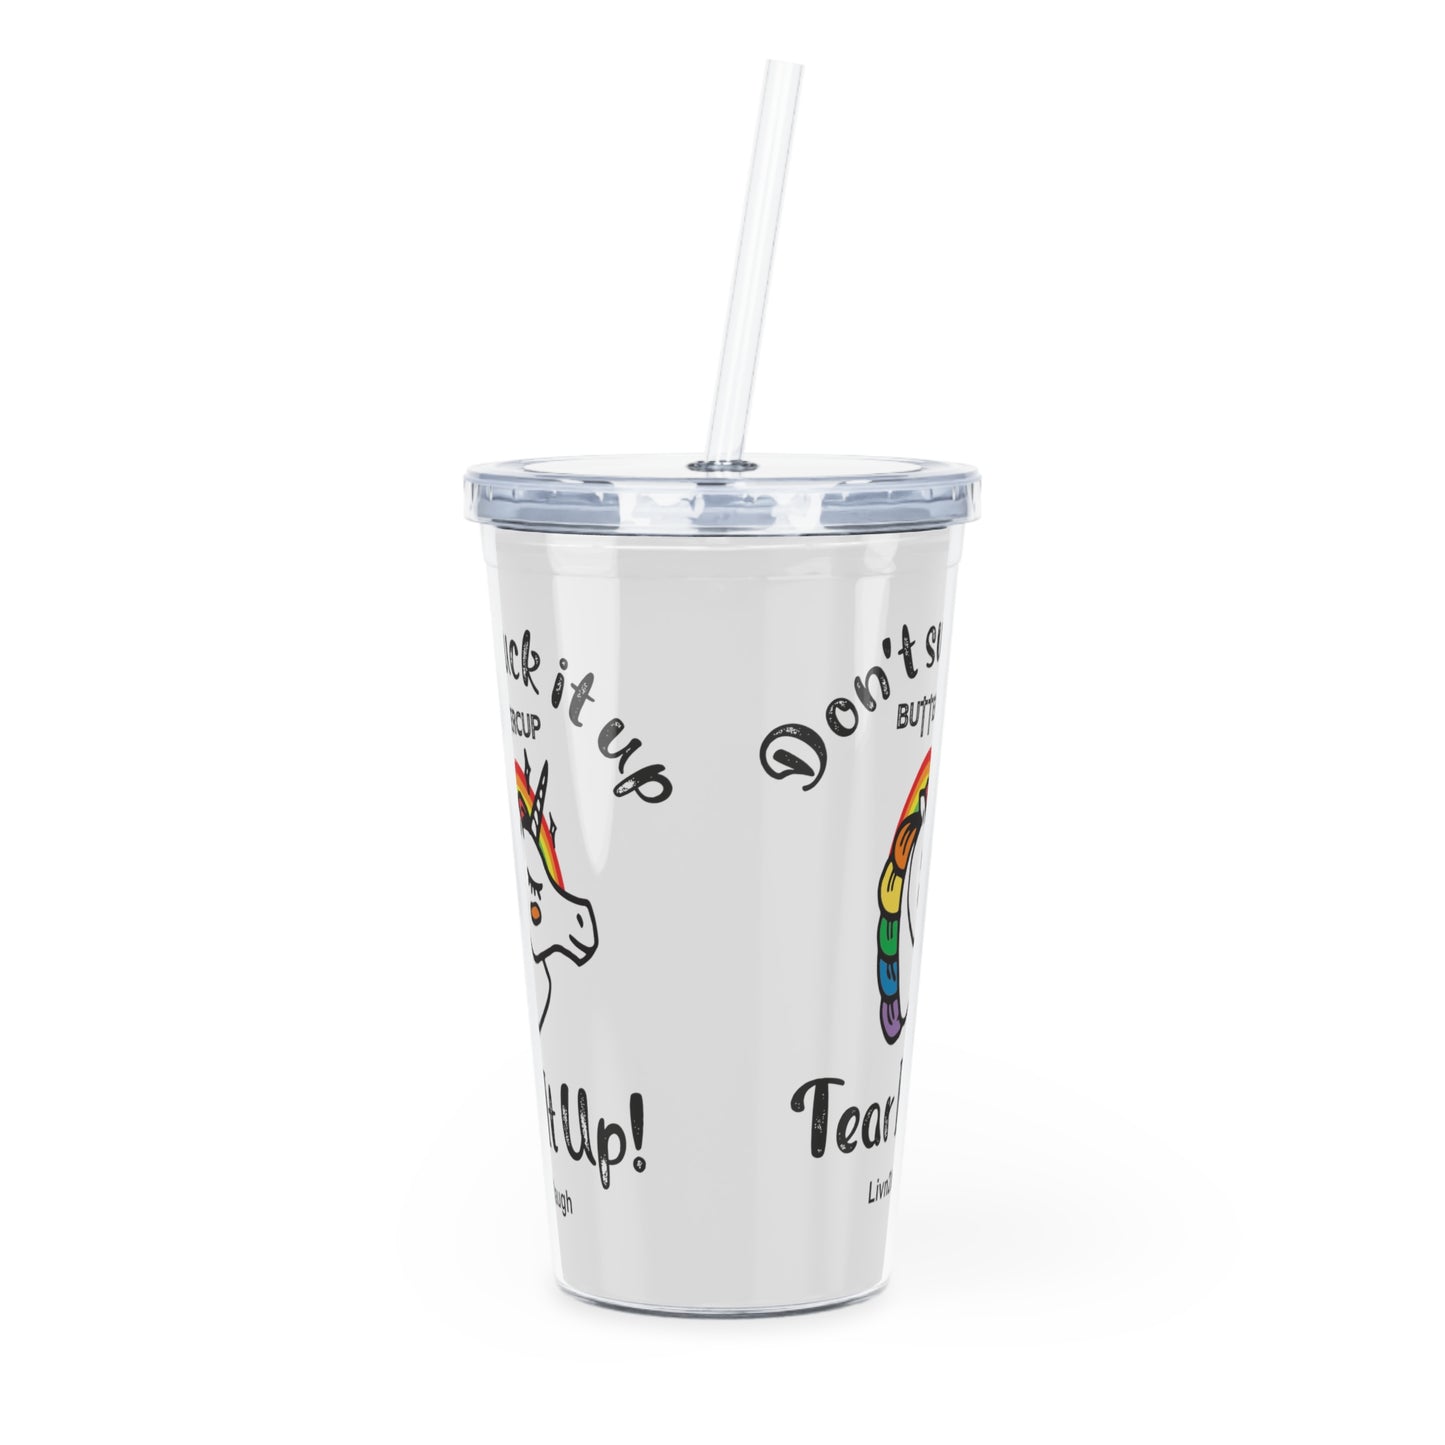 Unicorn And Rainbow, Don't Suck It Up Buttercup, Tear It Up Plastic Tumbler with Straw